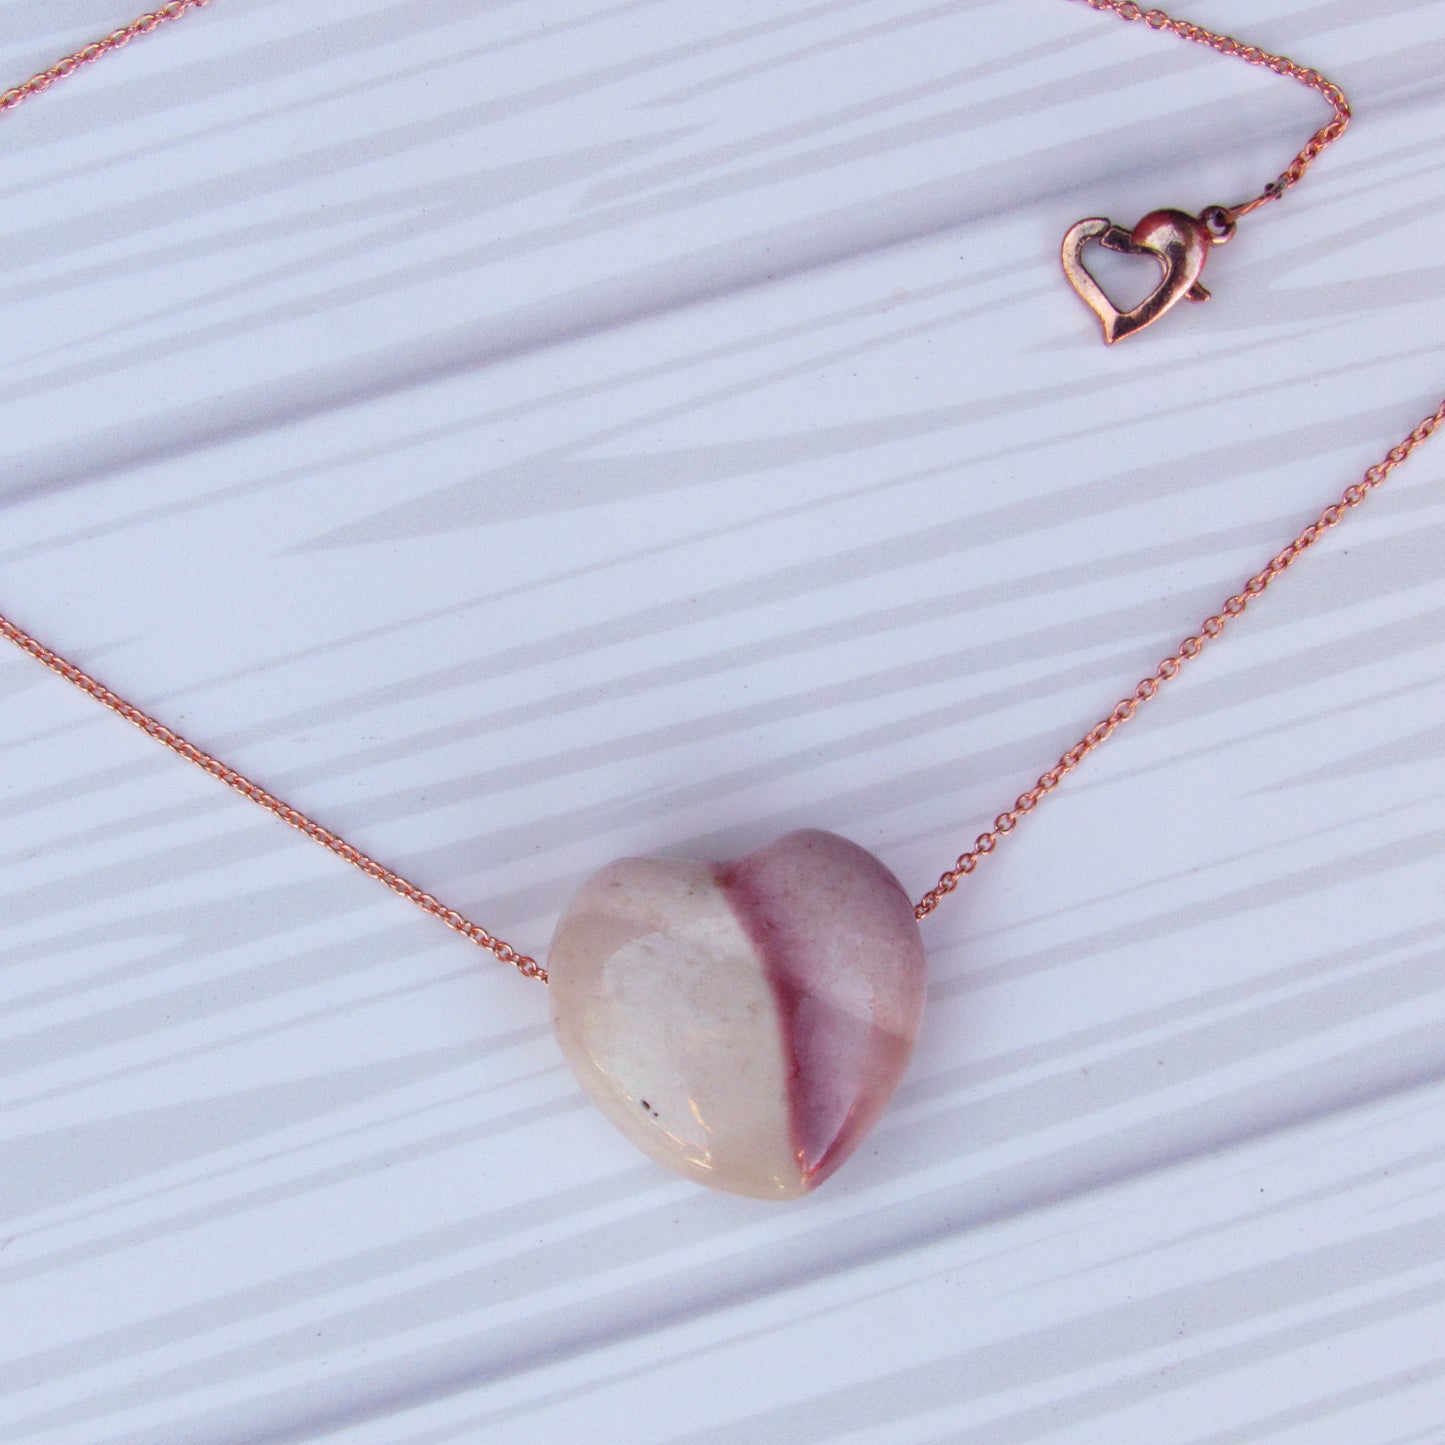 Mookaite Heart on Copper Chain Necklace